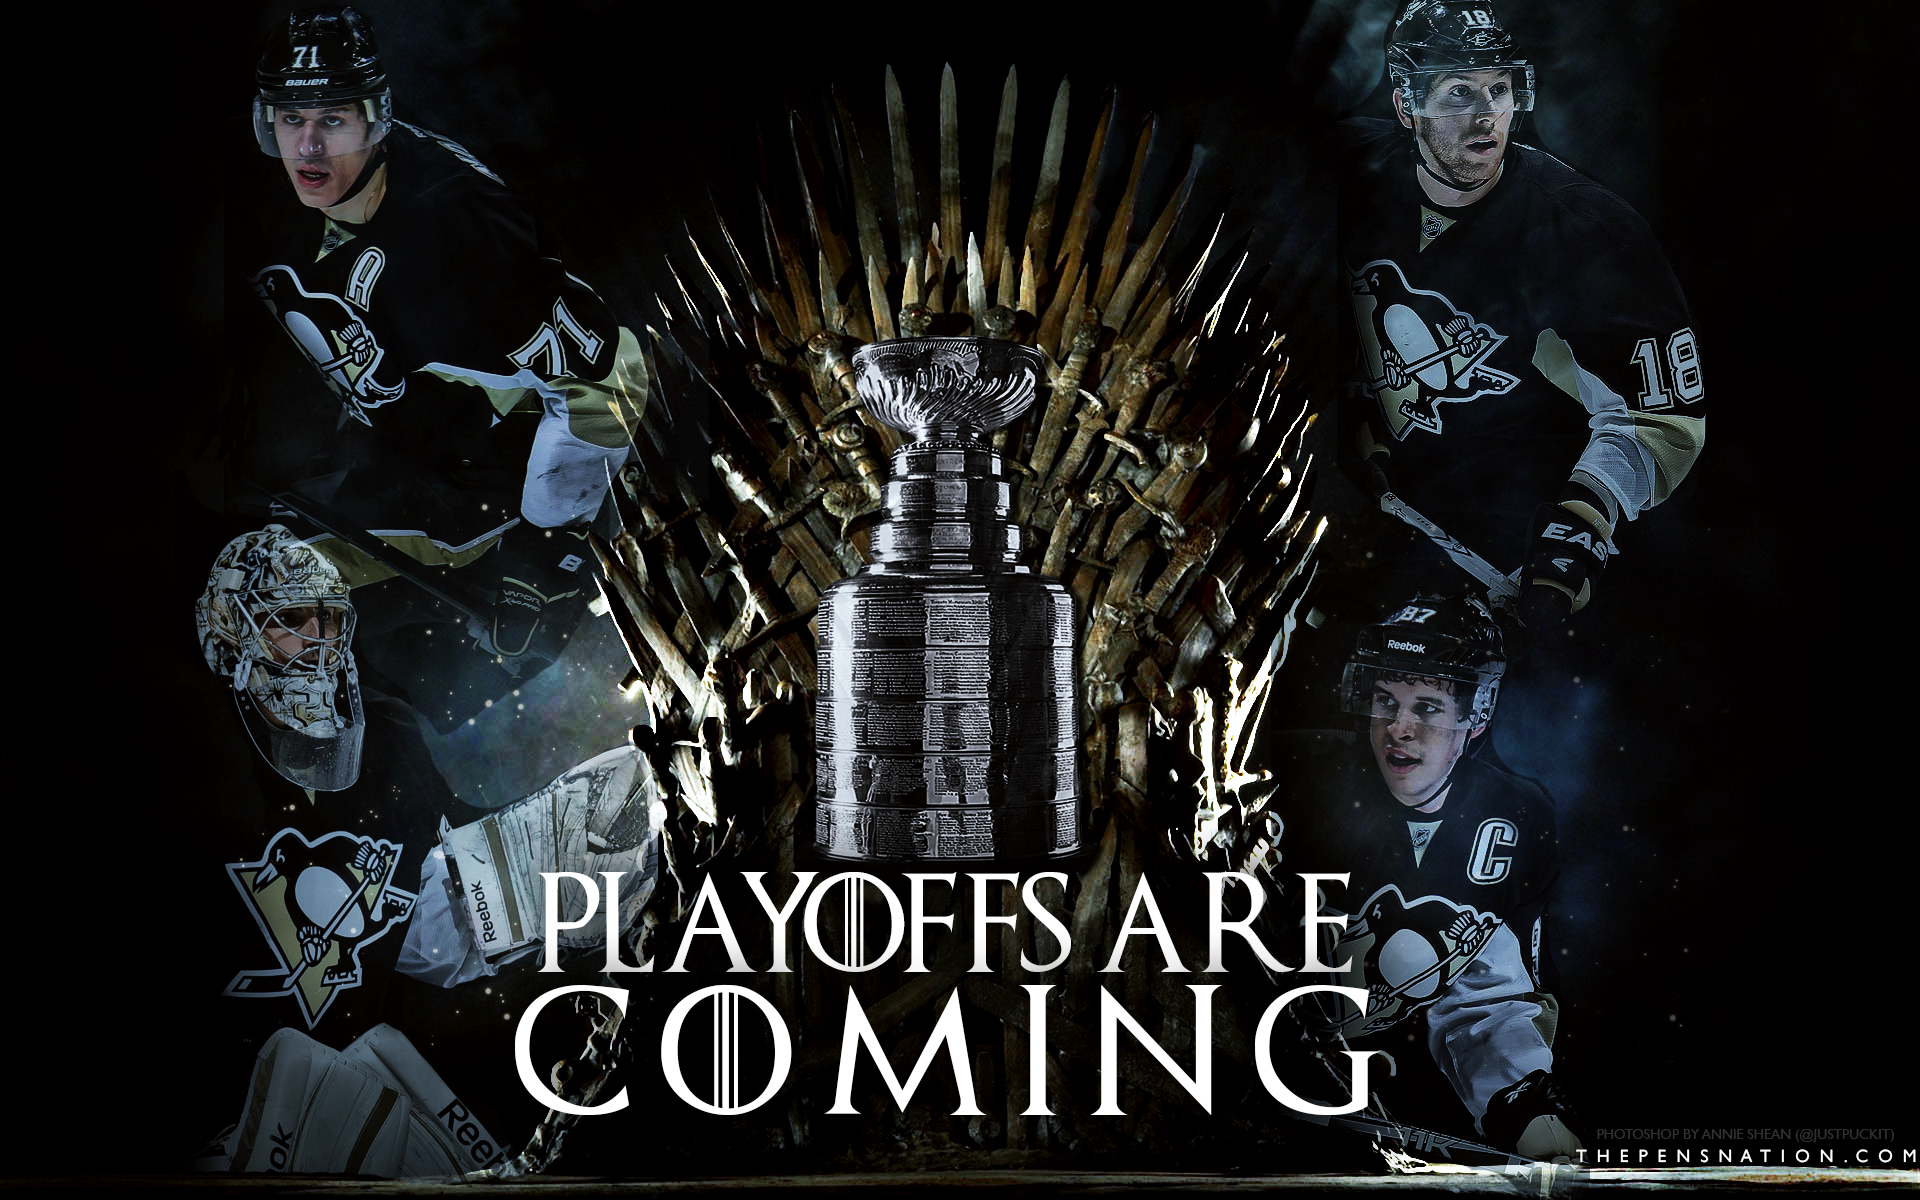  Penguins Stanley Cup Playoffs 2014 Wallpaper 01 house of penguin